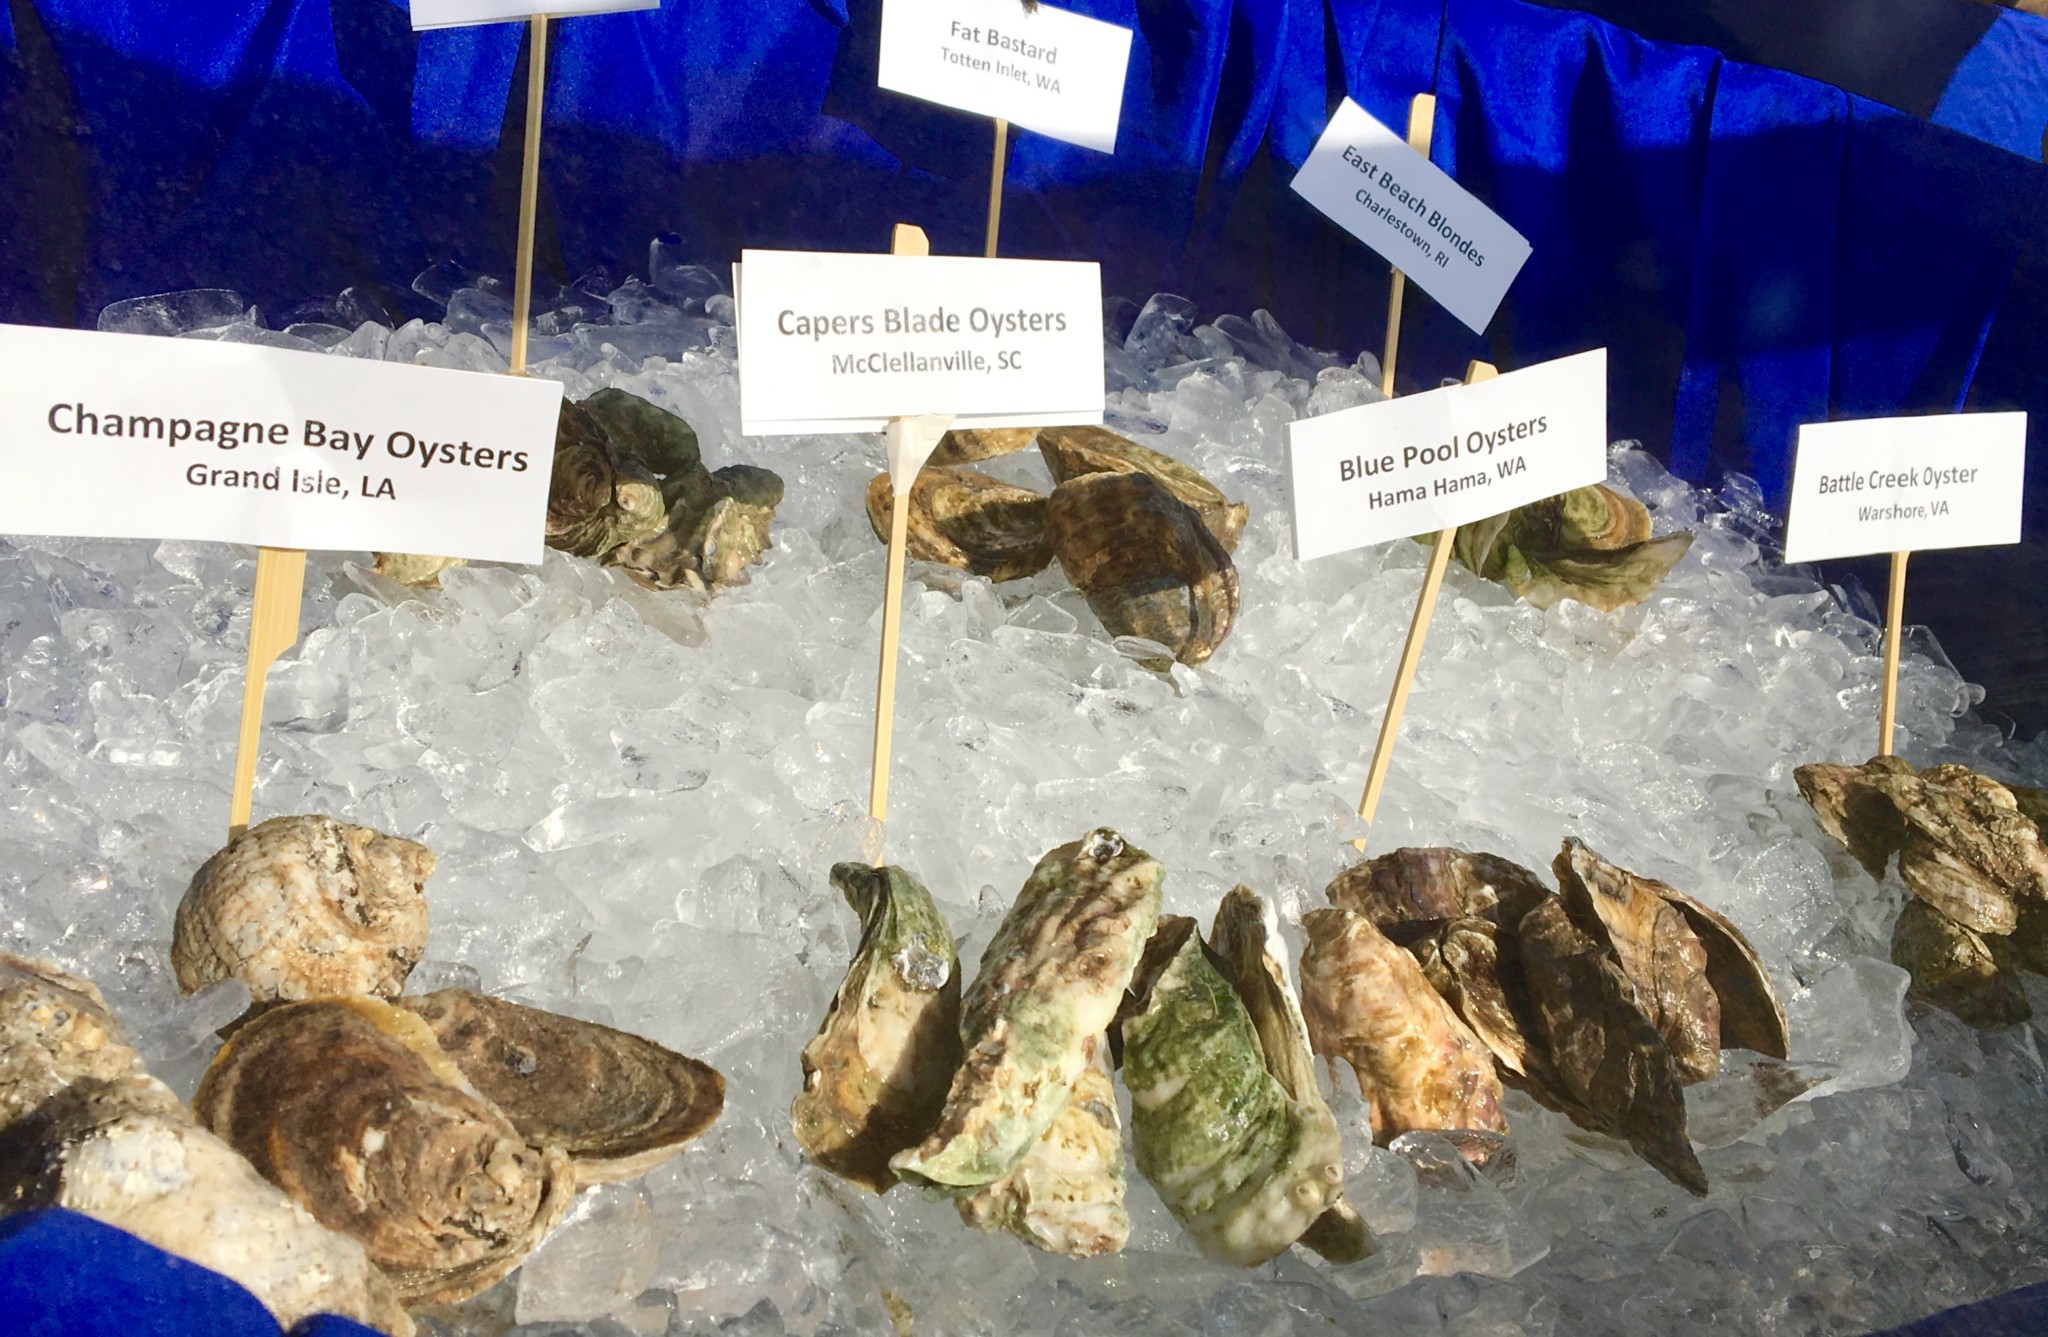 A few of the North American Oyster Showcase participants